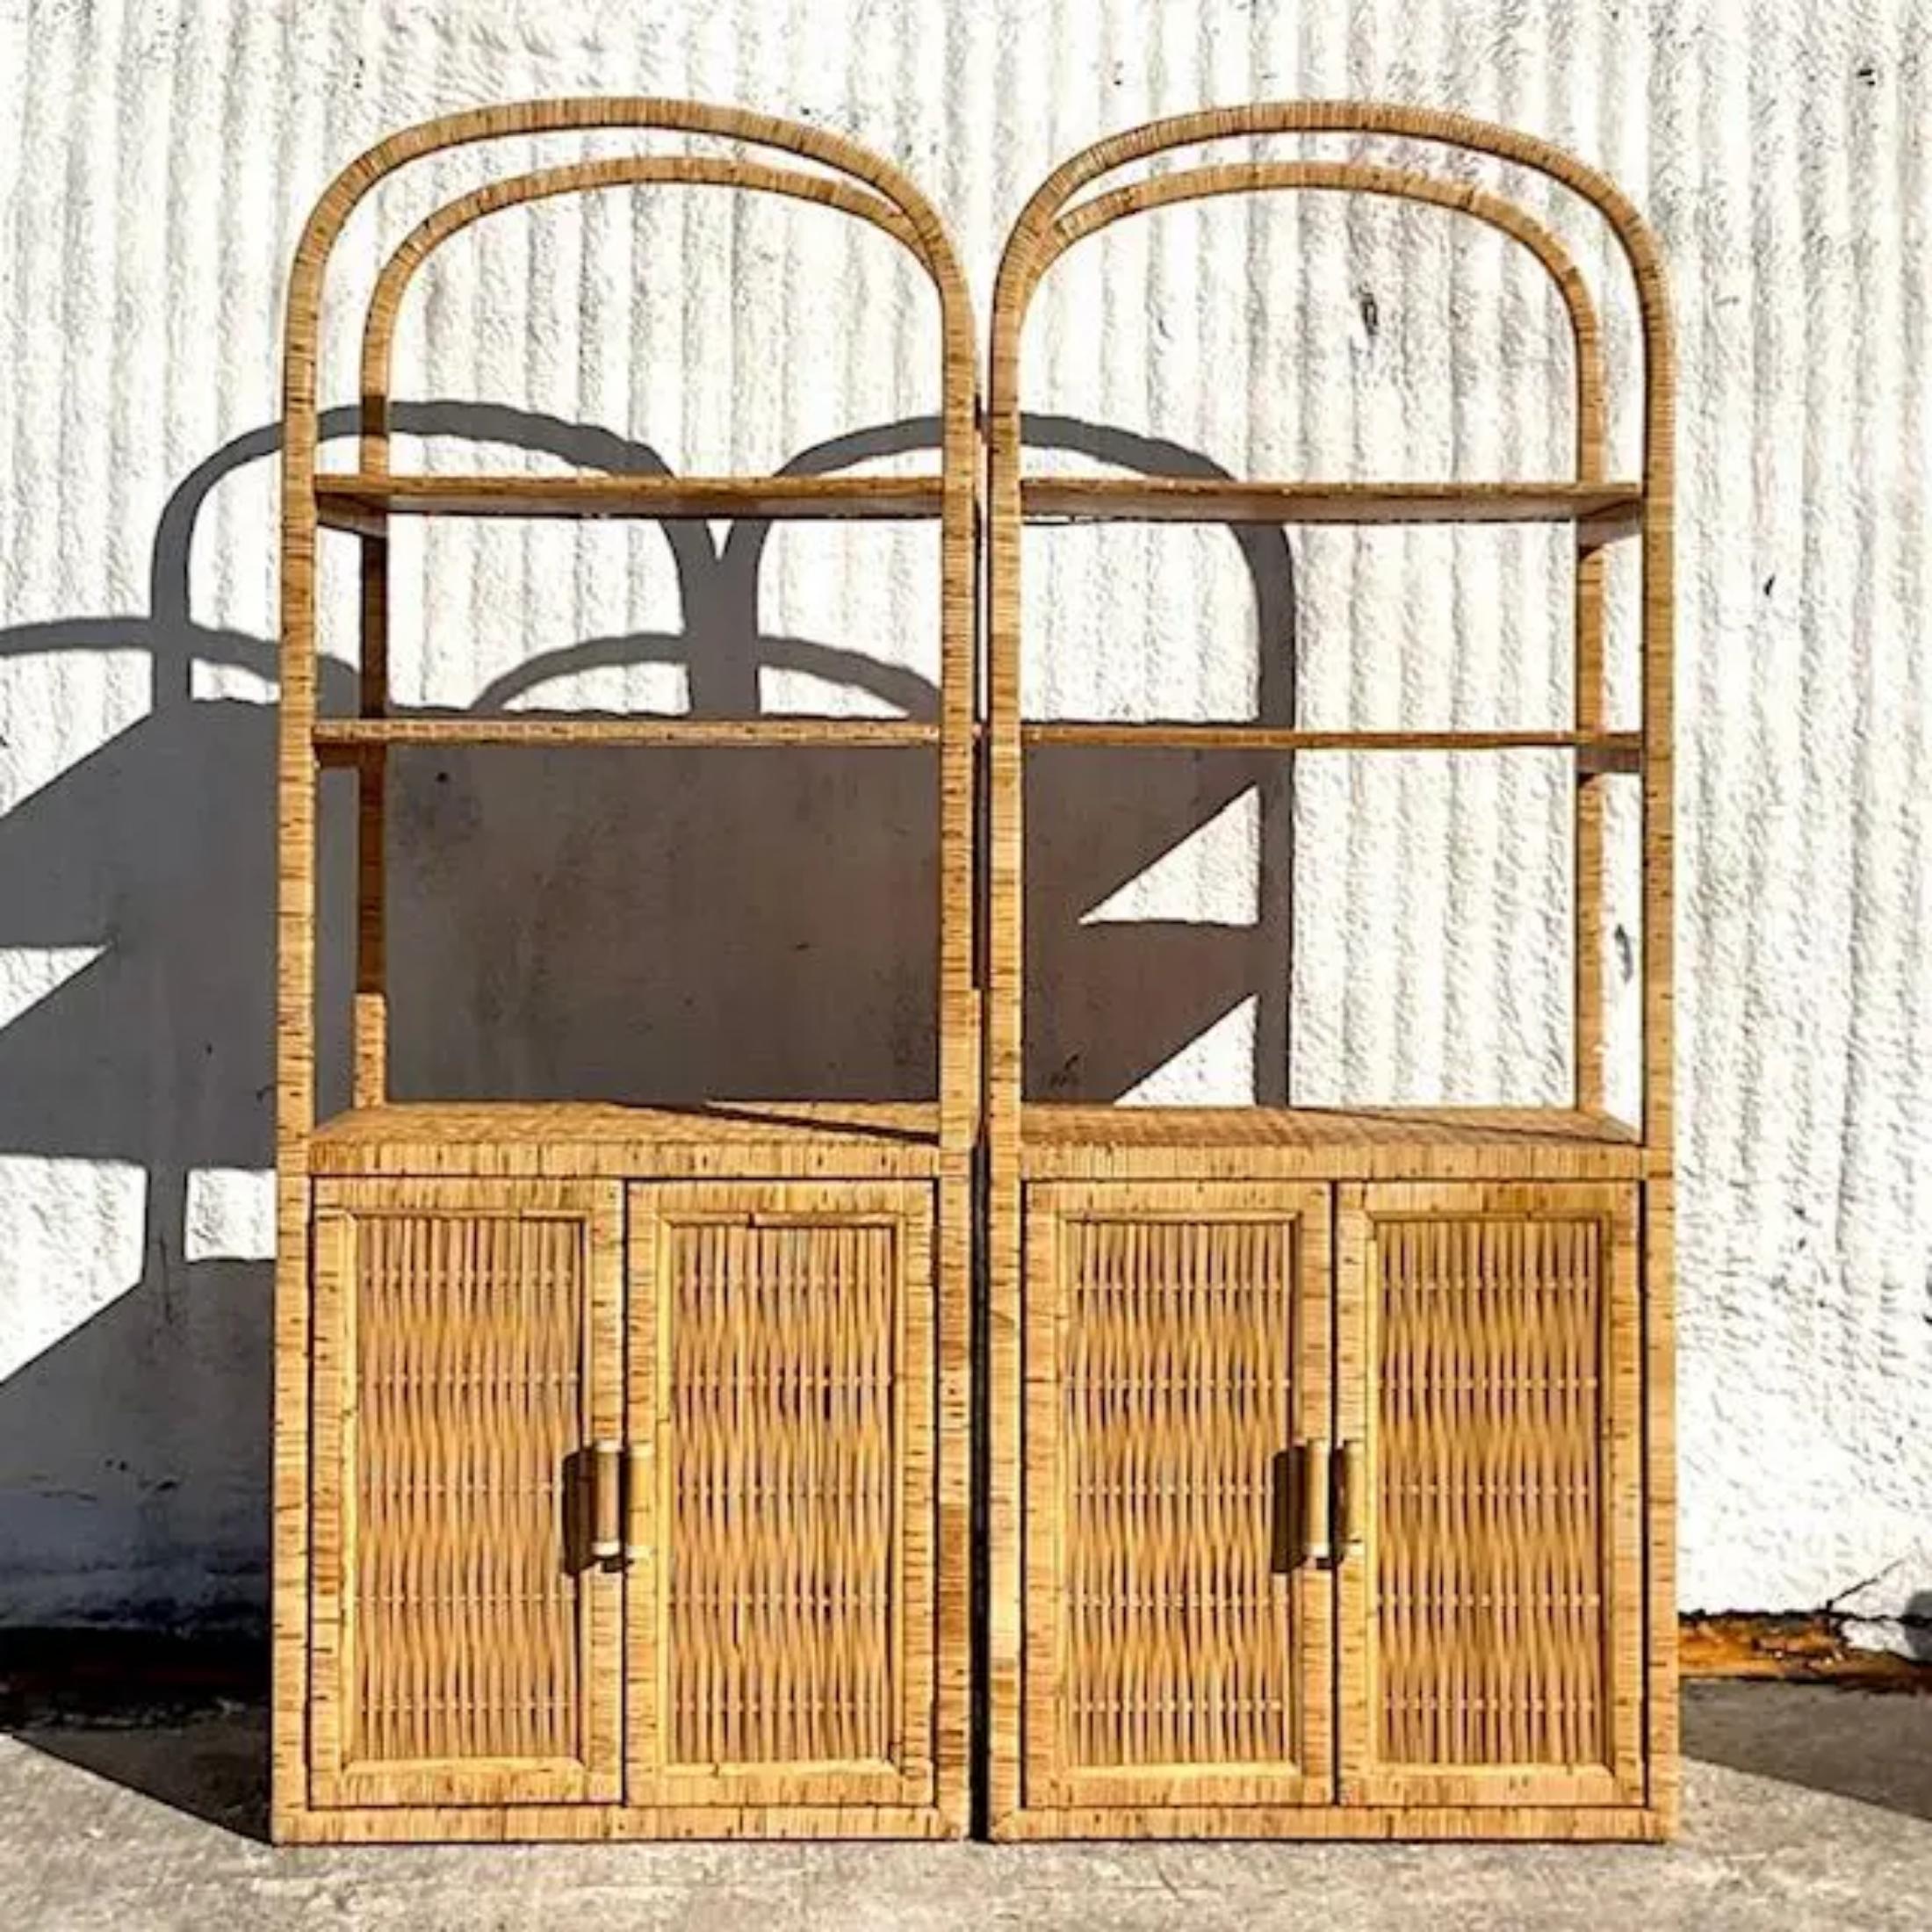 A fabulous pair of vintage Coastal etagere. A chic woven rattan in a clean arched design. Inset woven rattan shelves. Acquired from a Palm Beach estate